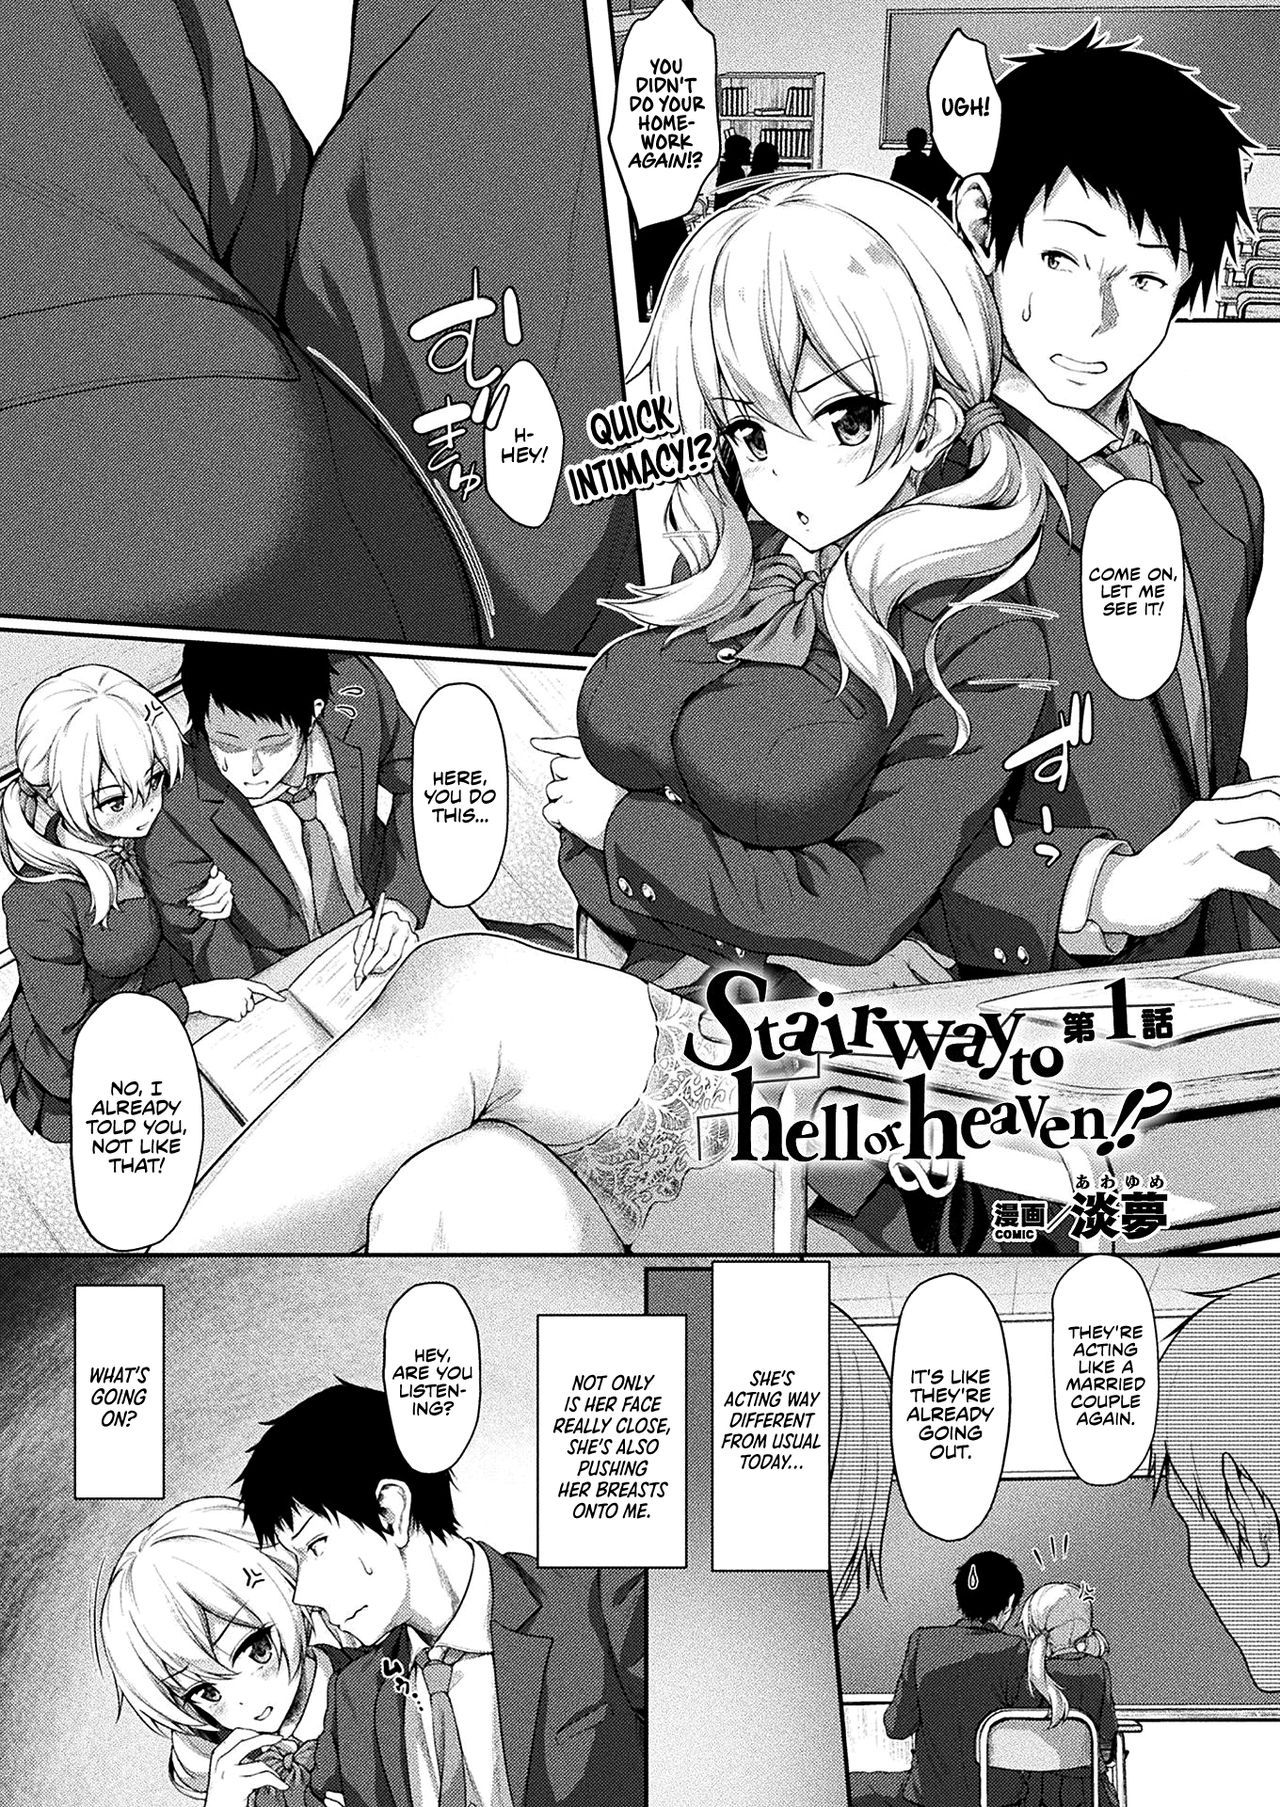 Stairway to hell or heaven!? Ch. 1-2 by "Awayume" - #173408 - Read hentai Manga online for free at Cartoon Porn